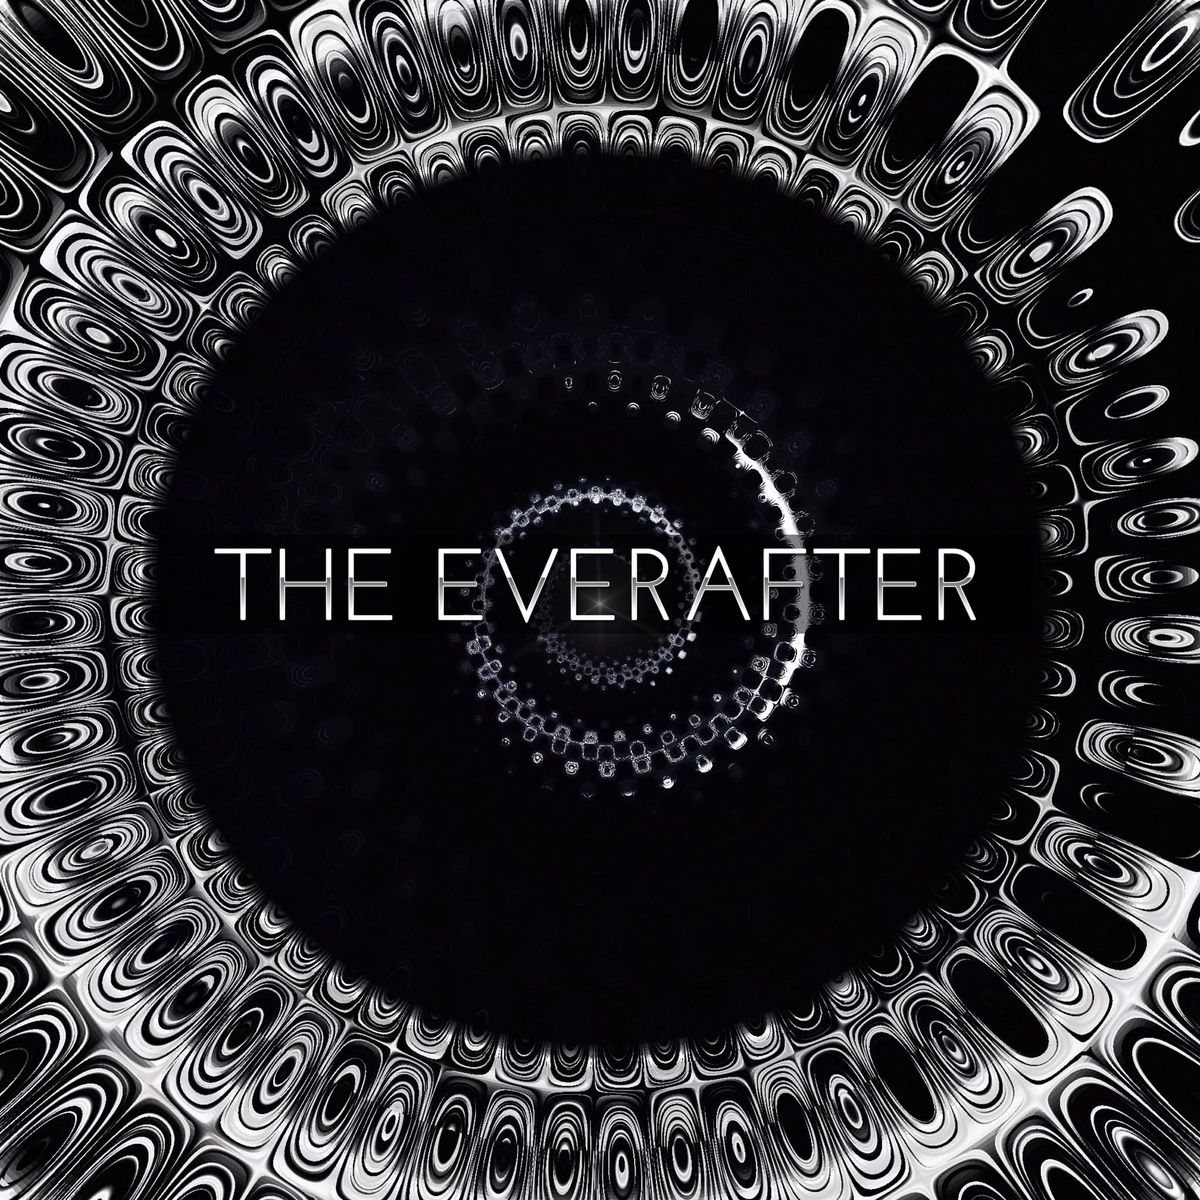 THE EVERAFTER @ Coconuts 